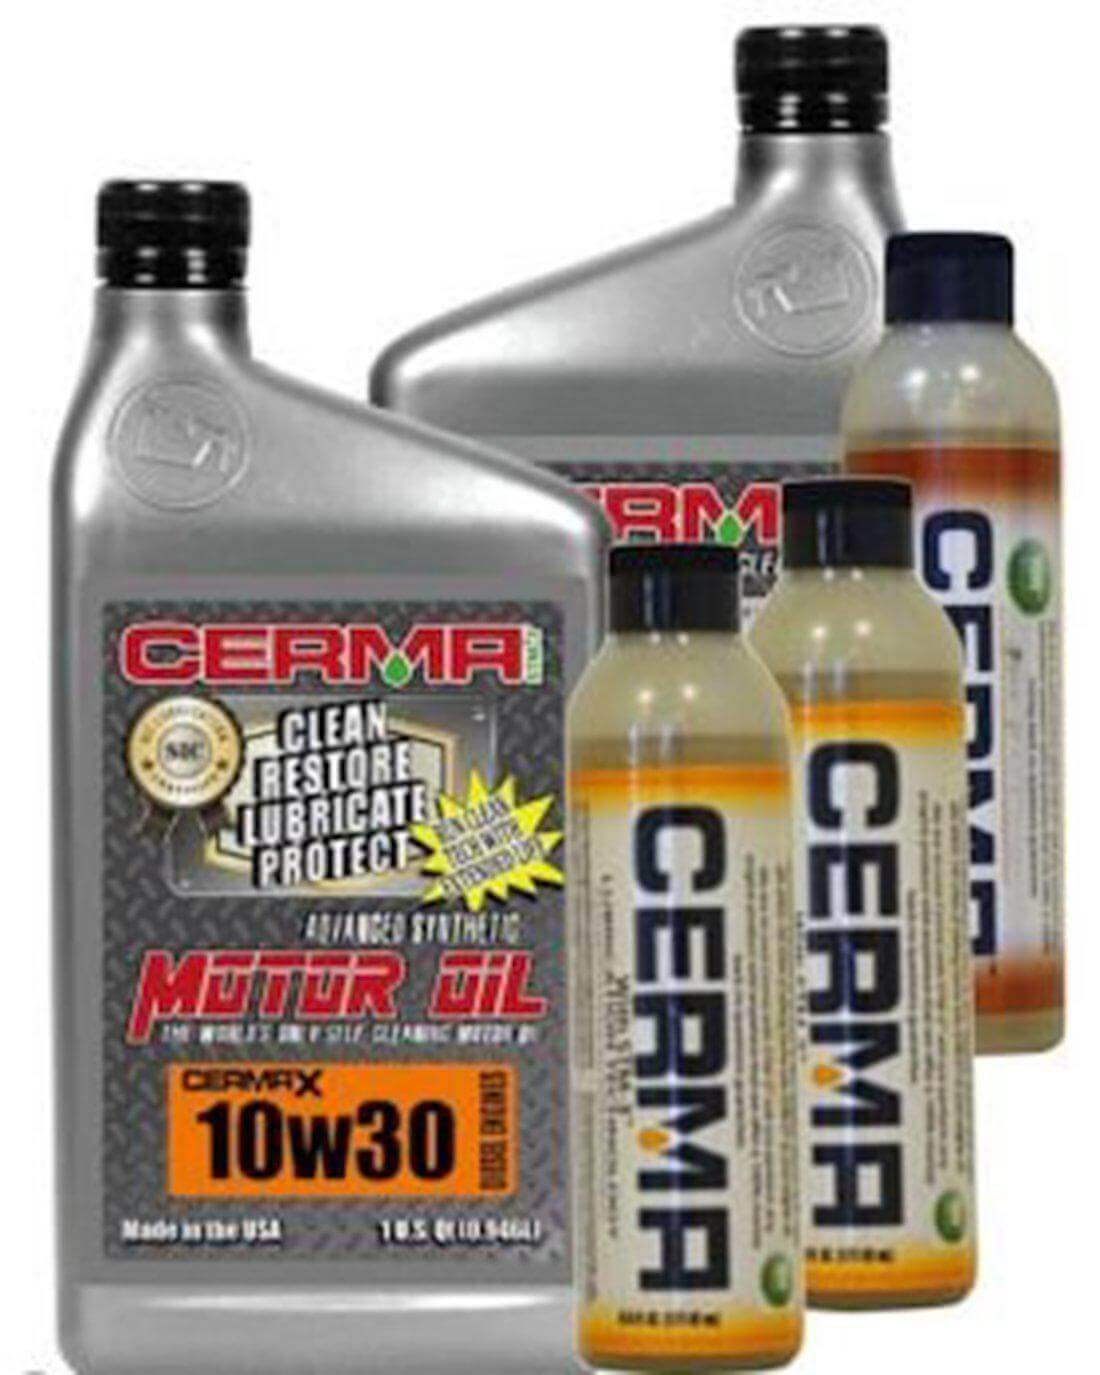 Cermax Diesel Ceramic Synthetic Oil Value Package for Semi Truck Engines at $942.91 only from cermatreatment.com